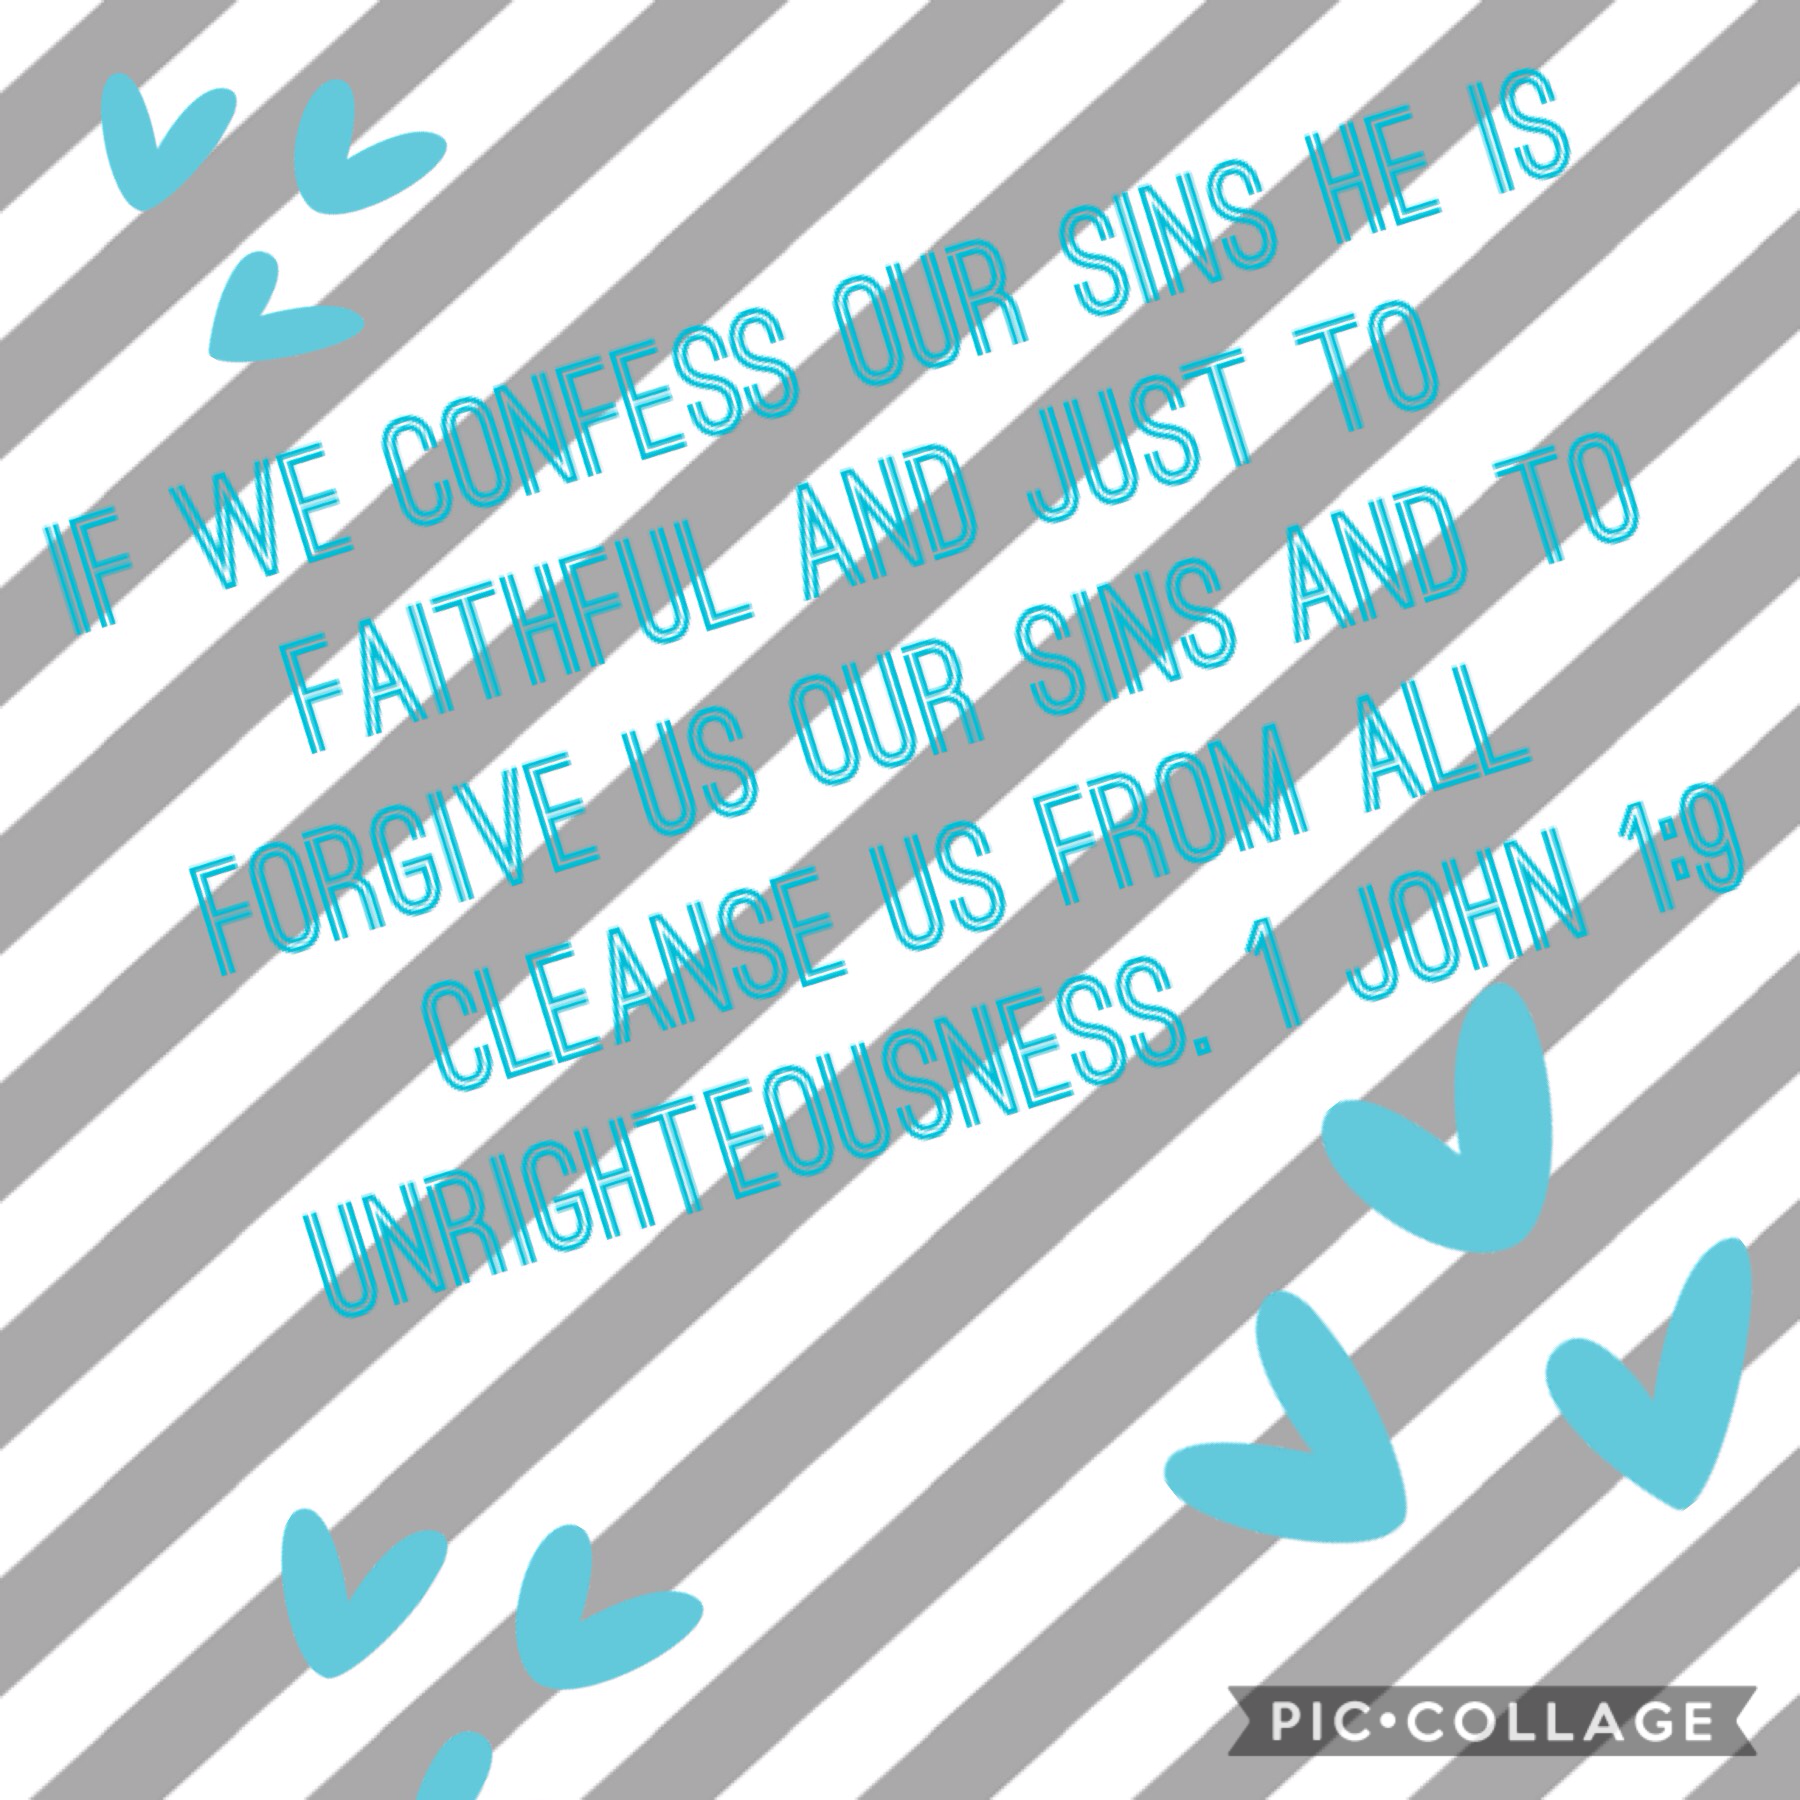 Confess your send before God and he WILL forgive and forget. 